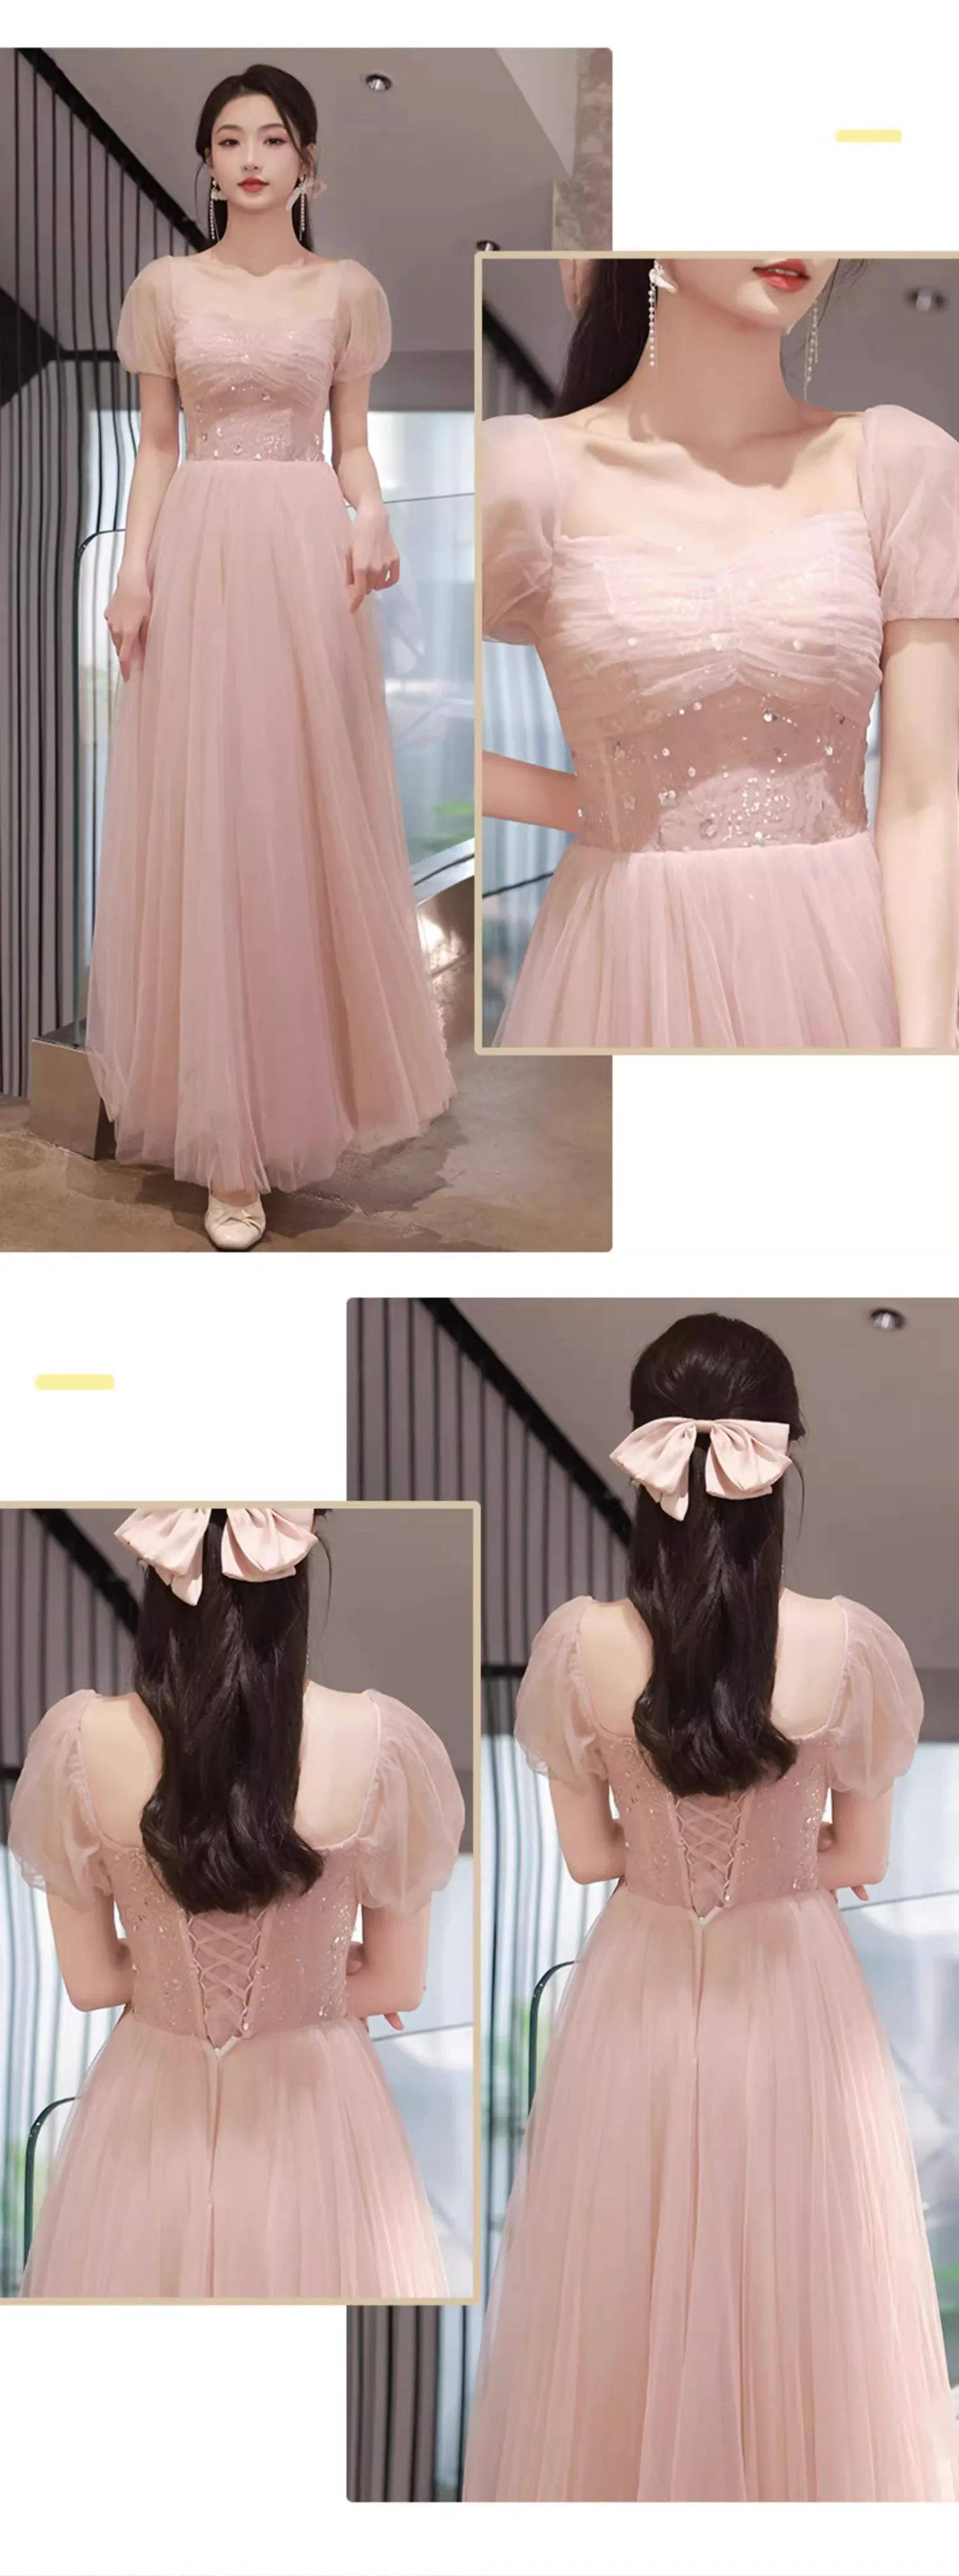 Trendy-Pink-Mesh-Chiffon-Bridesmaid-Maxi-Dress-Evening-Party-Gown15